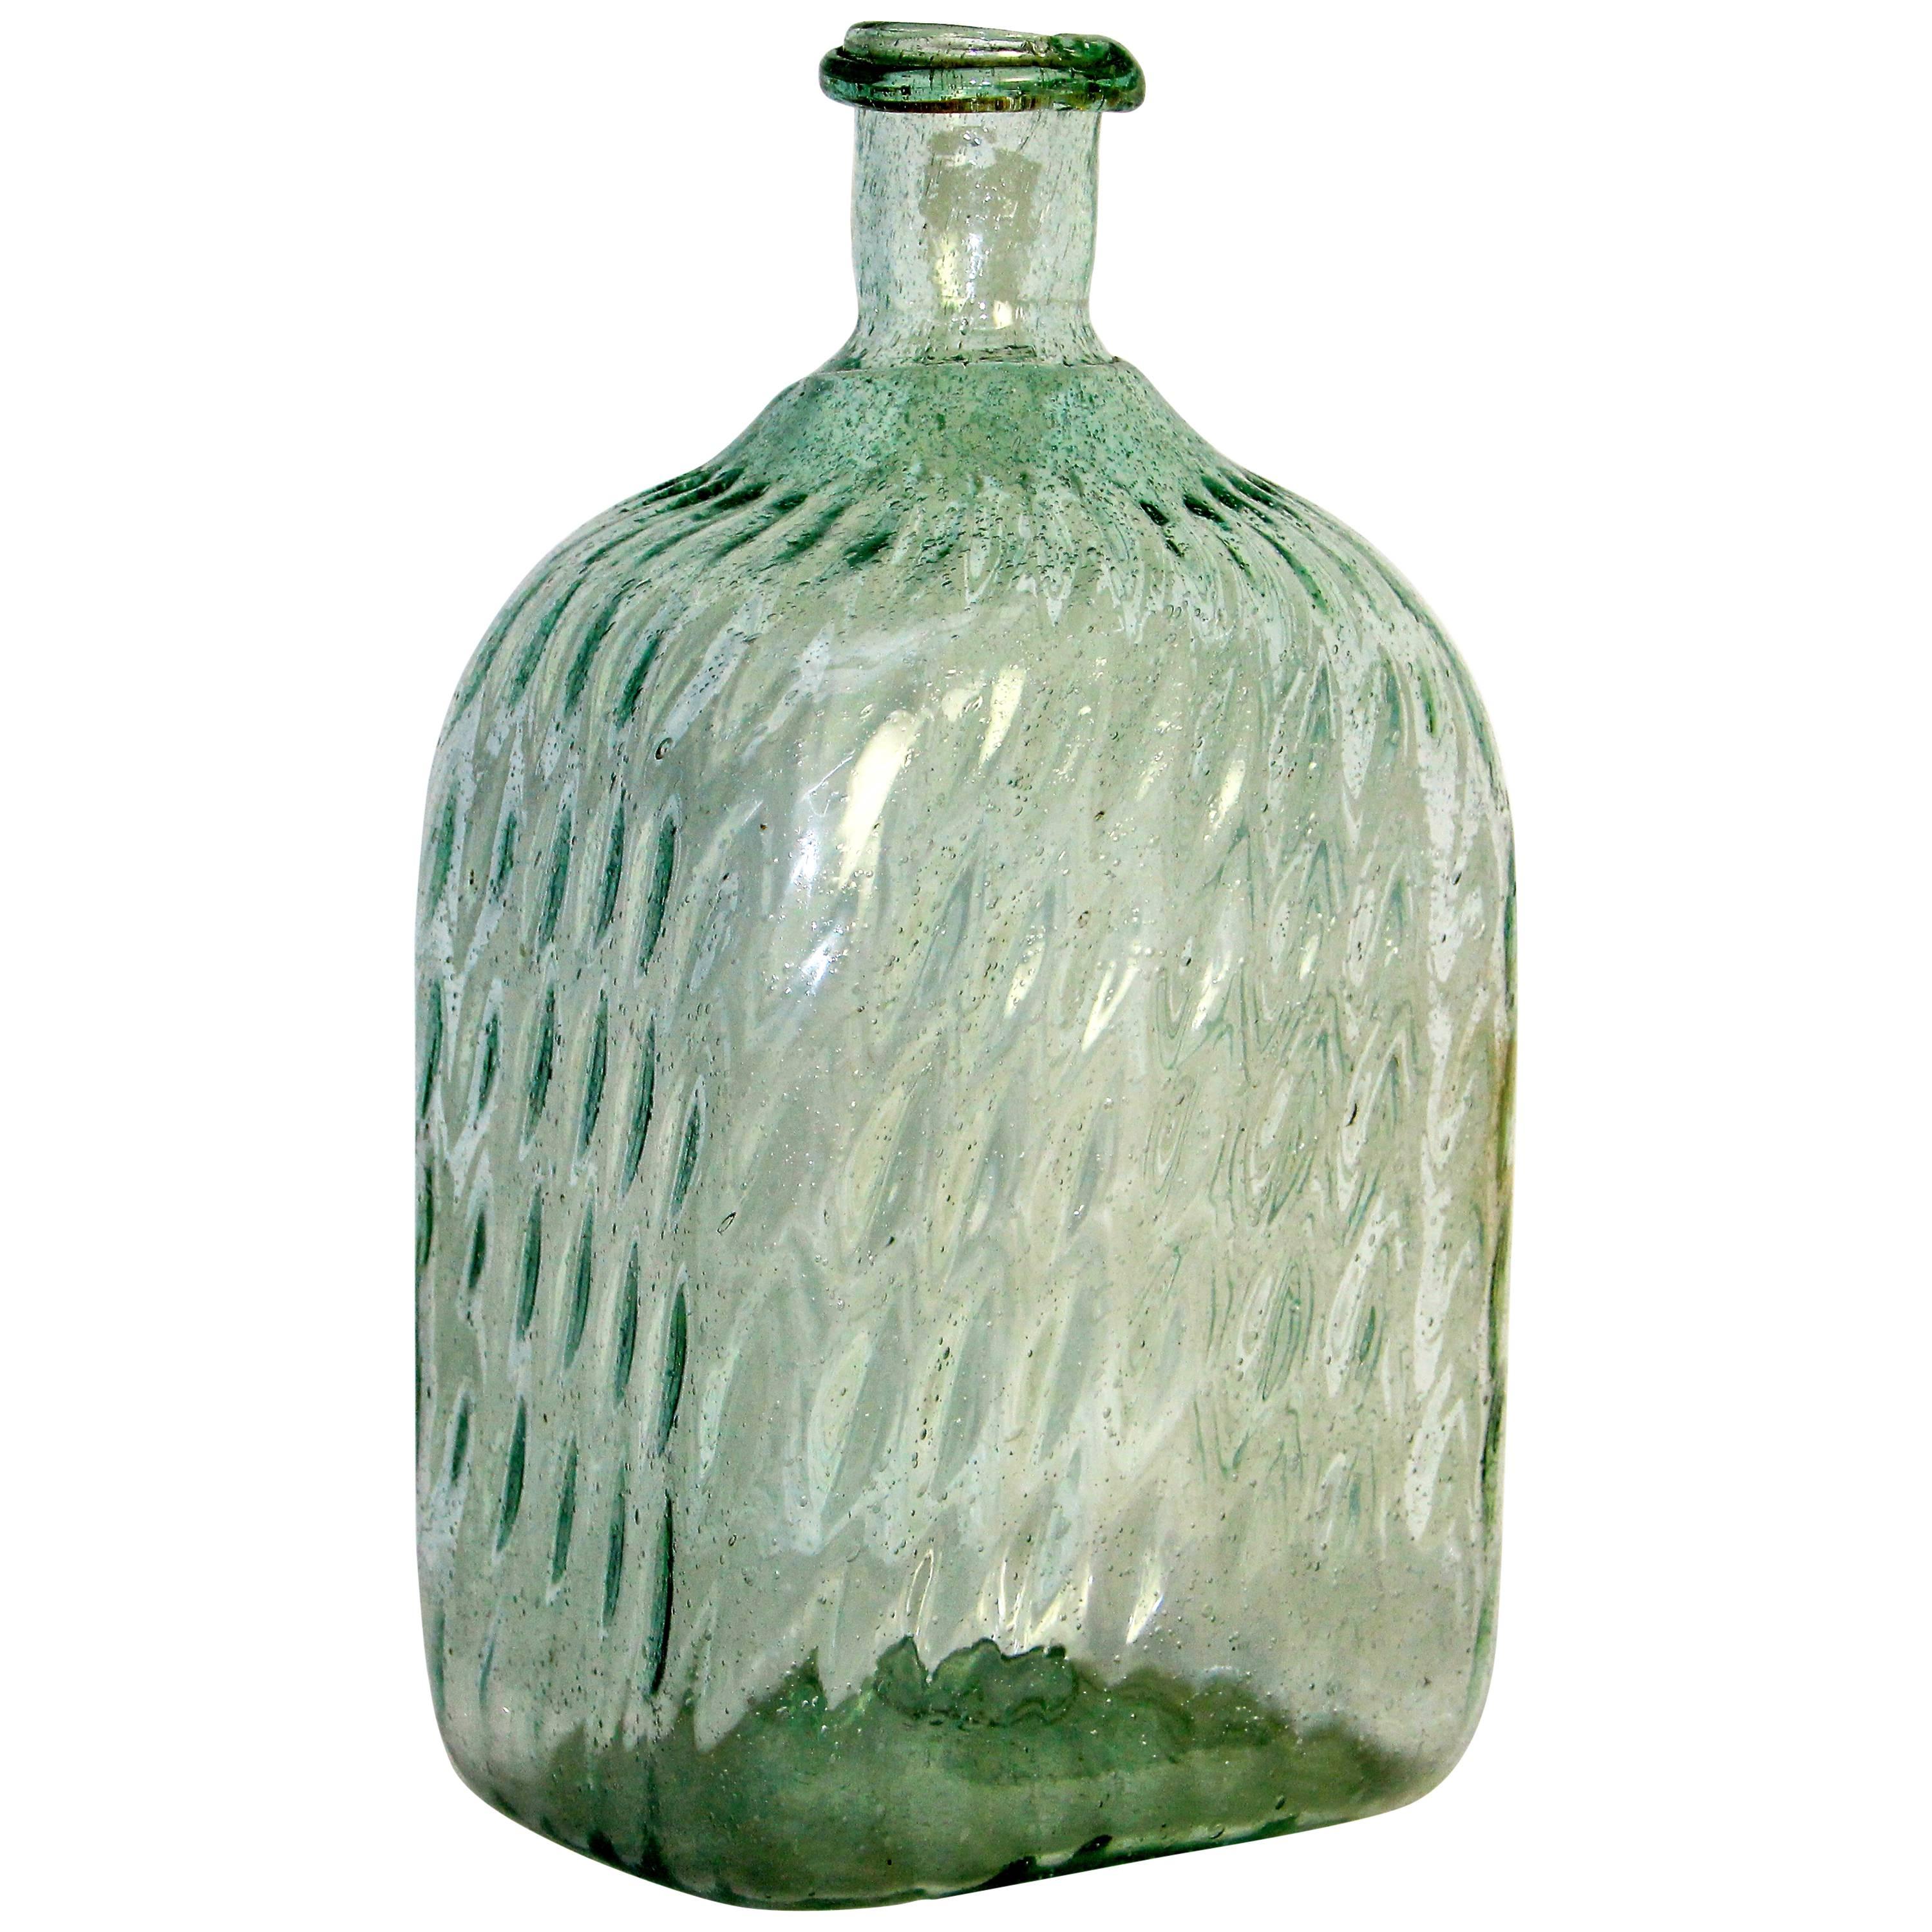 Baroque Waterbottle from circa 1750, Great Rarity